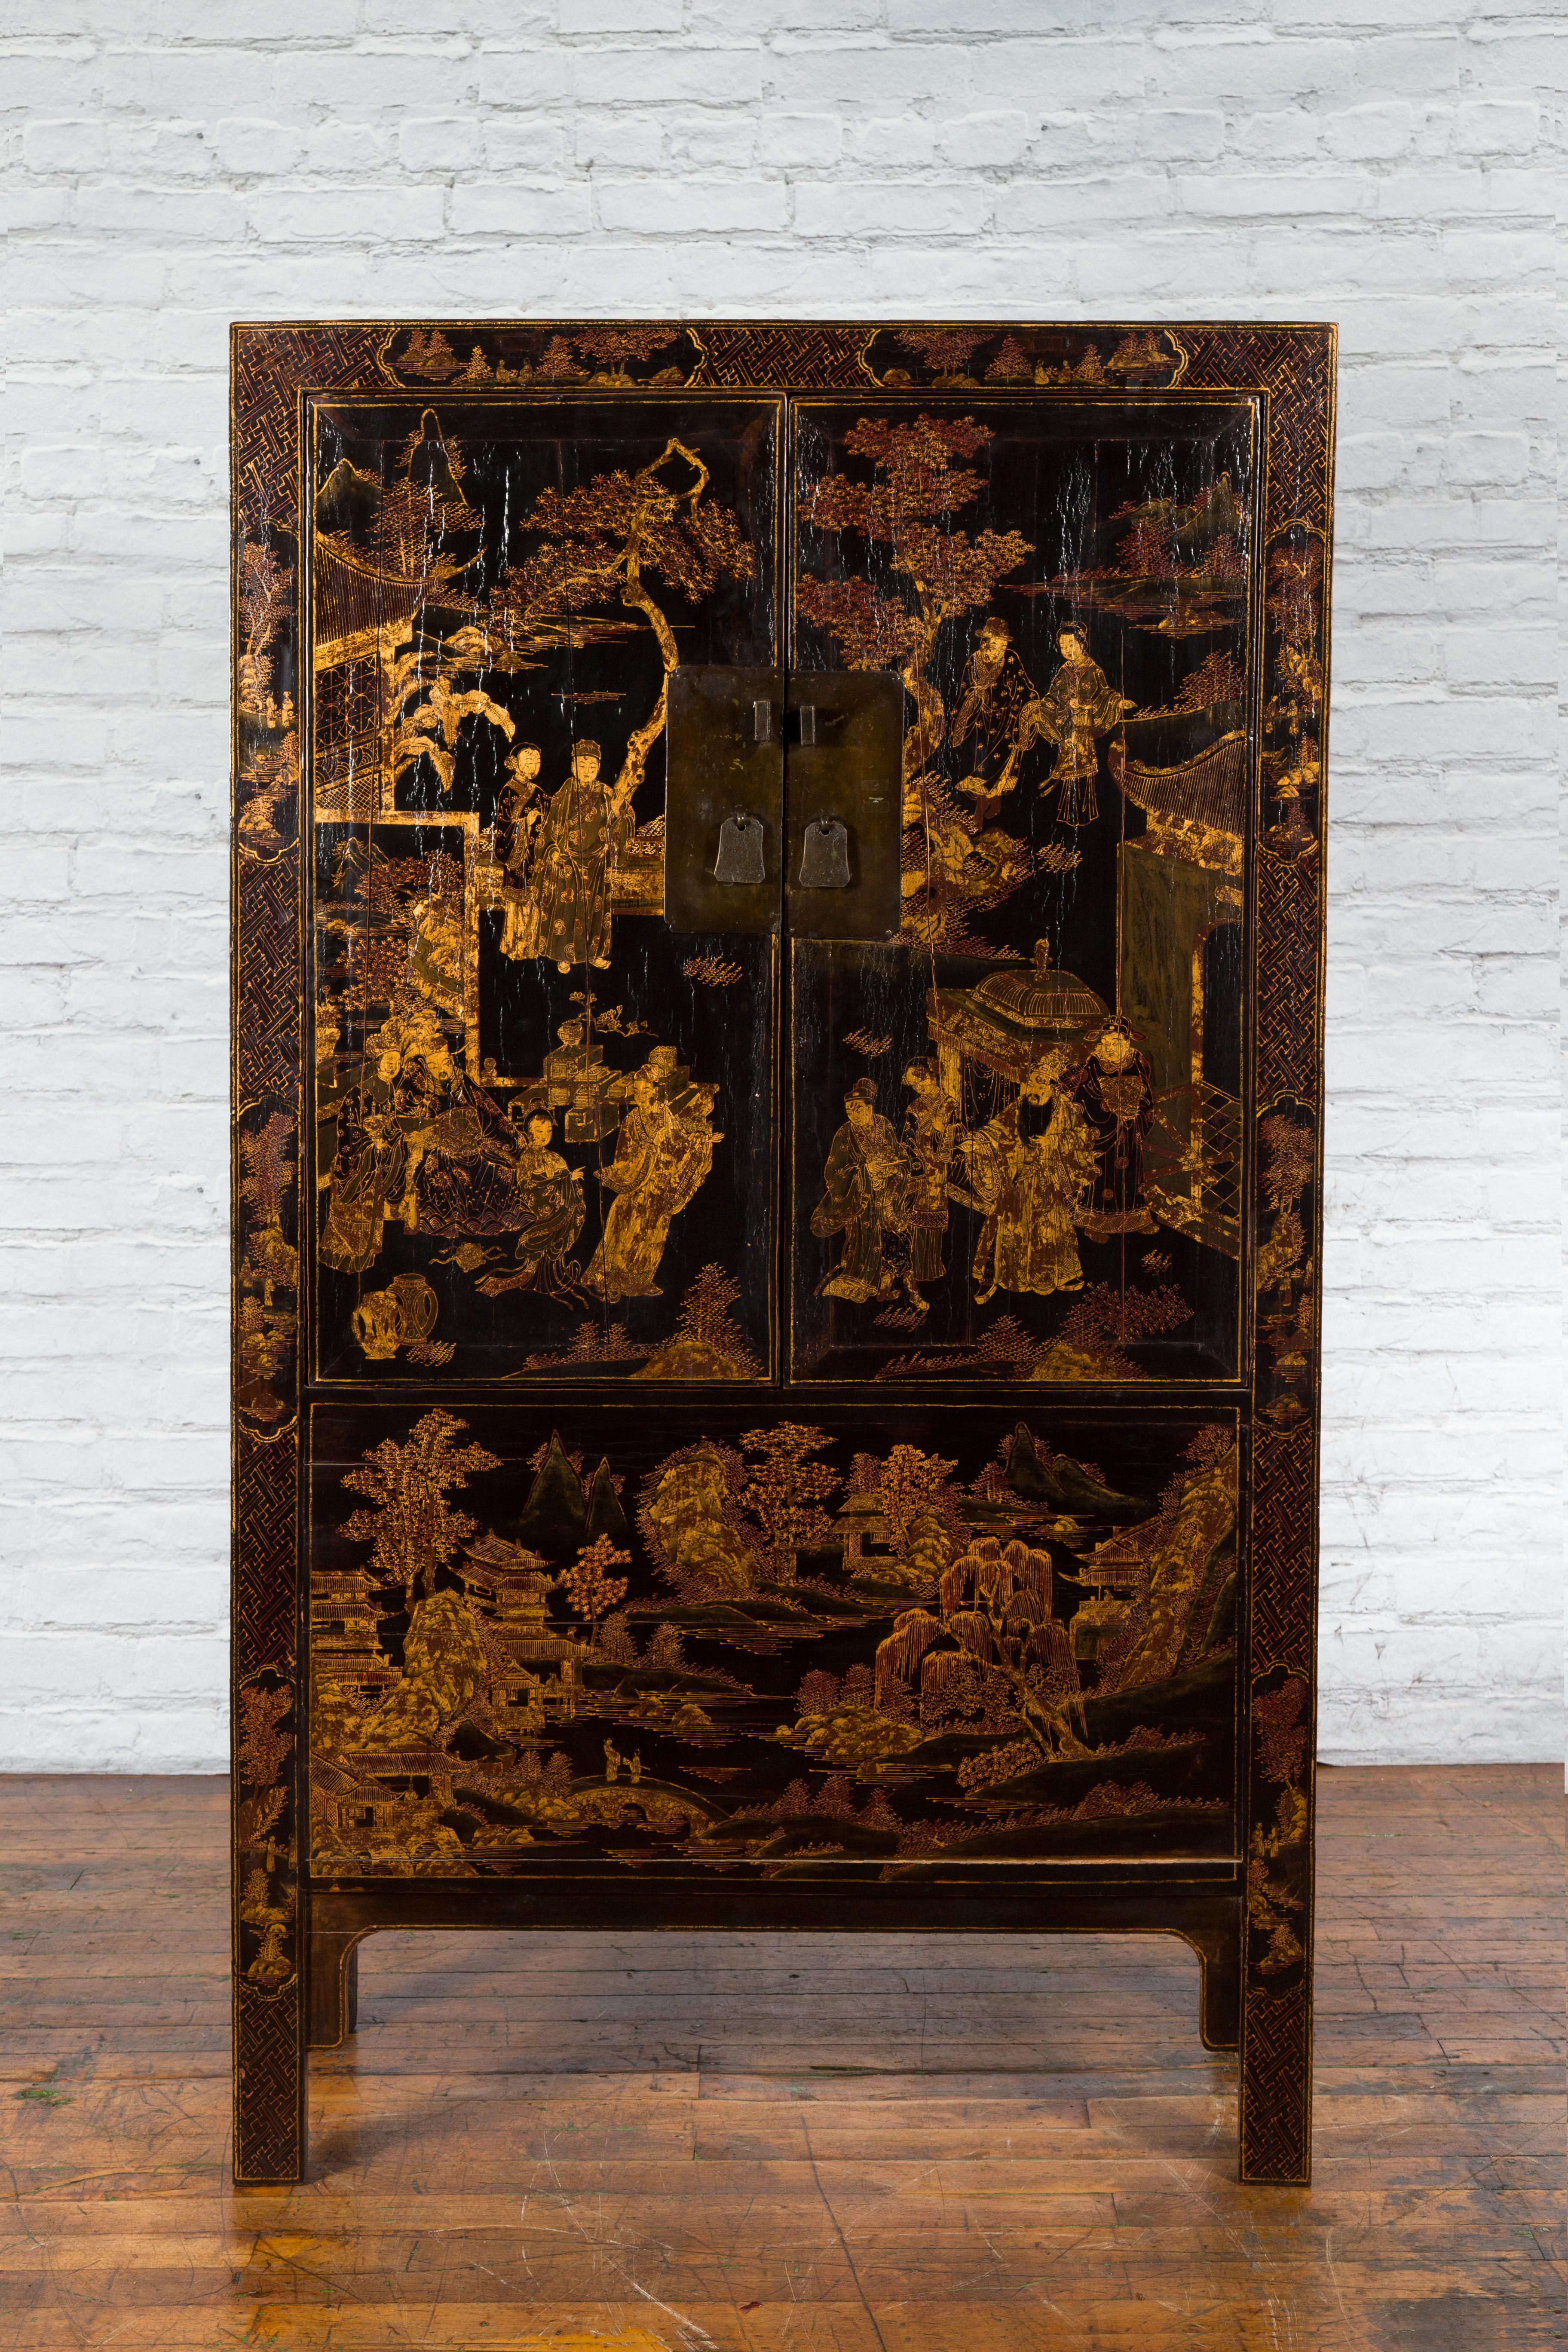 A Chinese Qing Dynasty period black lacquered cabinet from the 19th century, with gilt Chinoiserie décor and hidden drawers. Created in China during the Qing Dynasty era, this cabinet features a black lacquered ground beautifully adorned with a